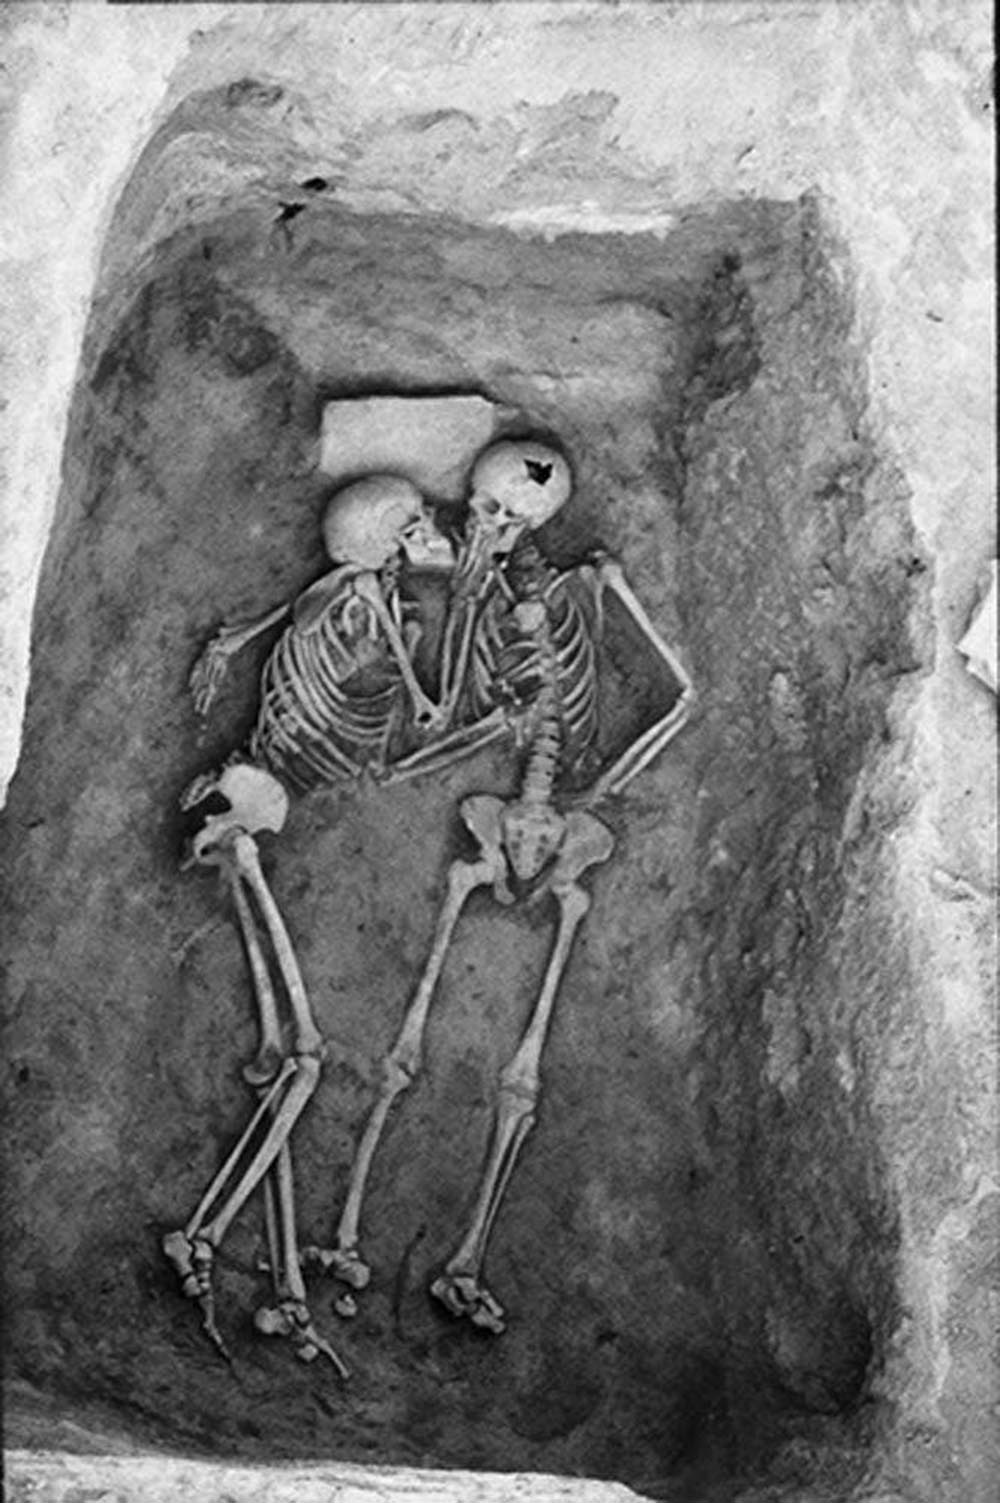 The 2800 years old kiss (The Hasanlu “Lovers”) Historical Photo